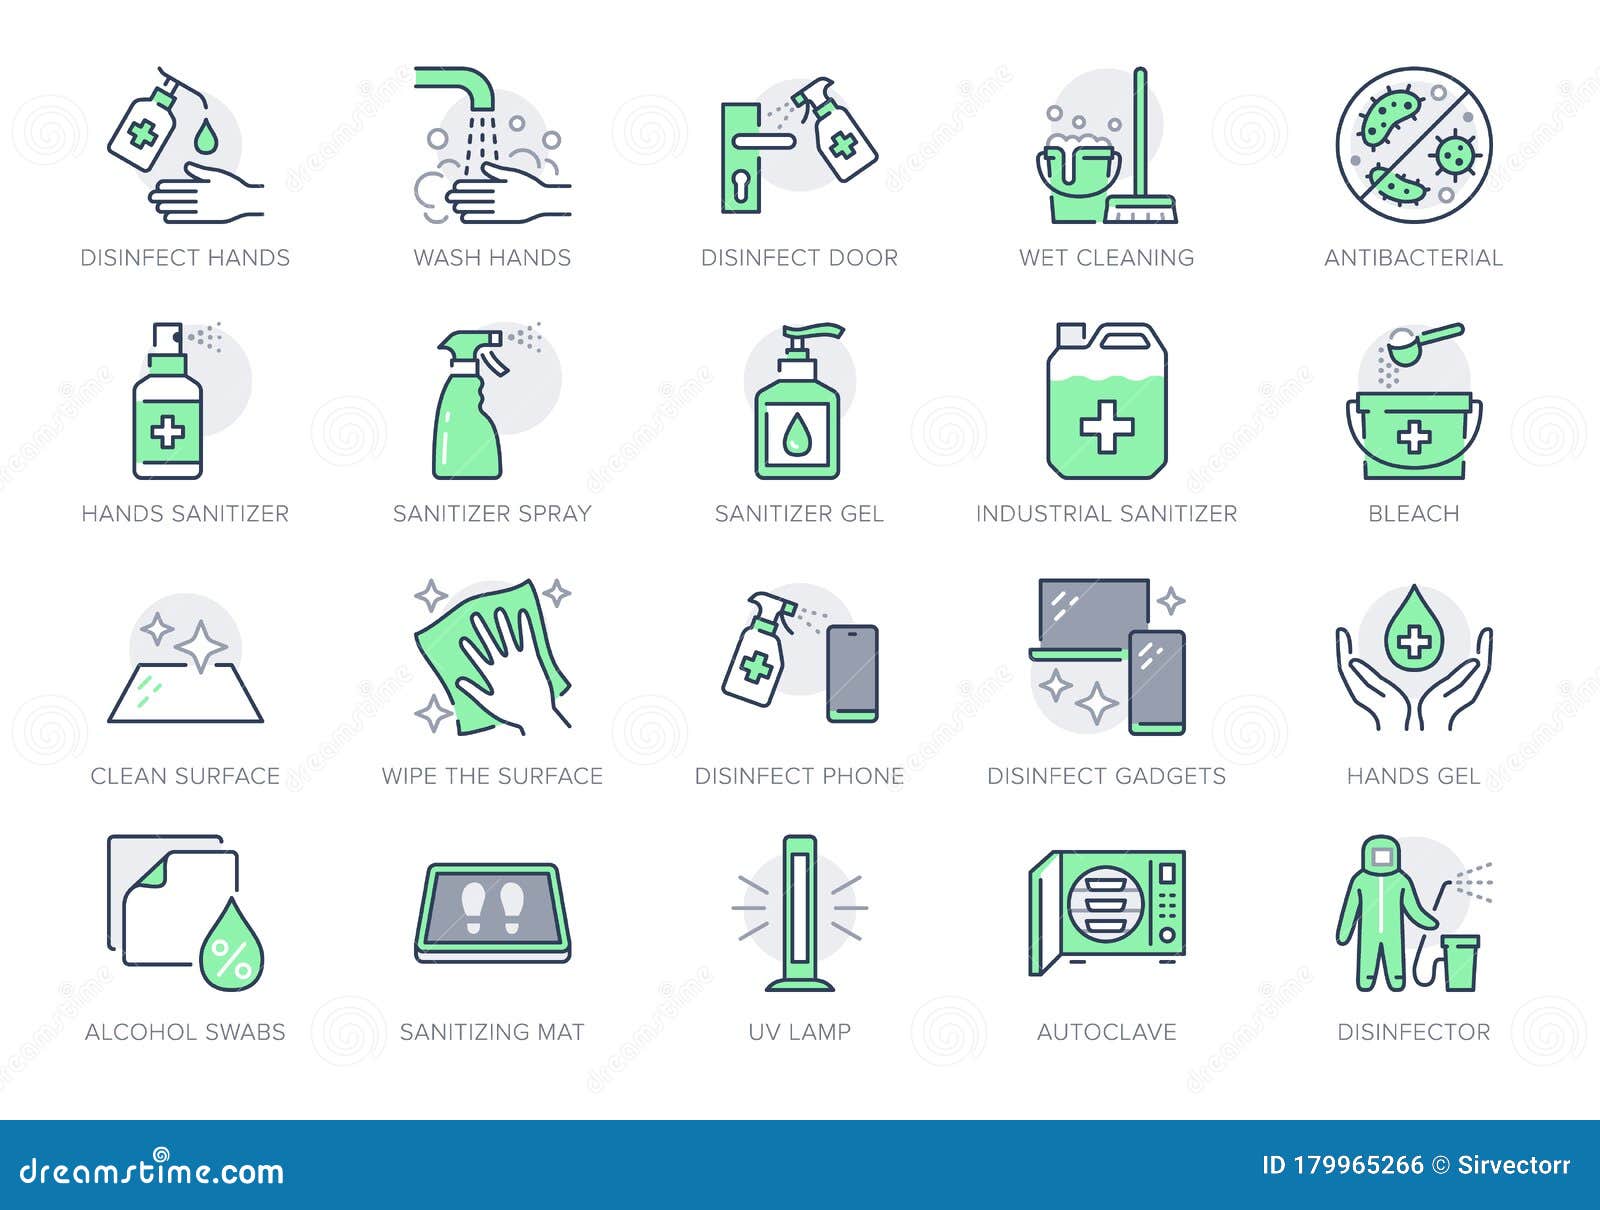 disinfection line icons.   included icon as spray bottle, floor cleaning mop, wash hand gel, autoclave